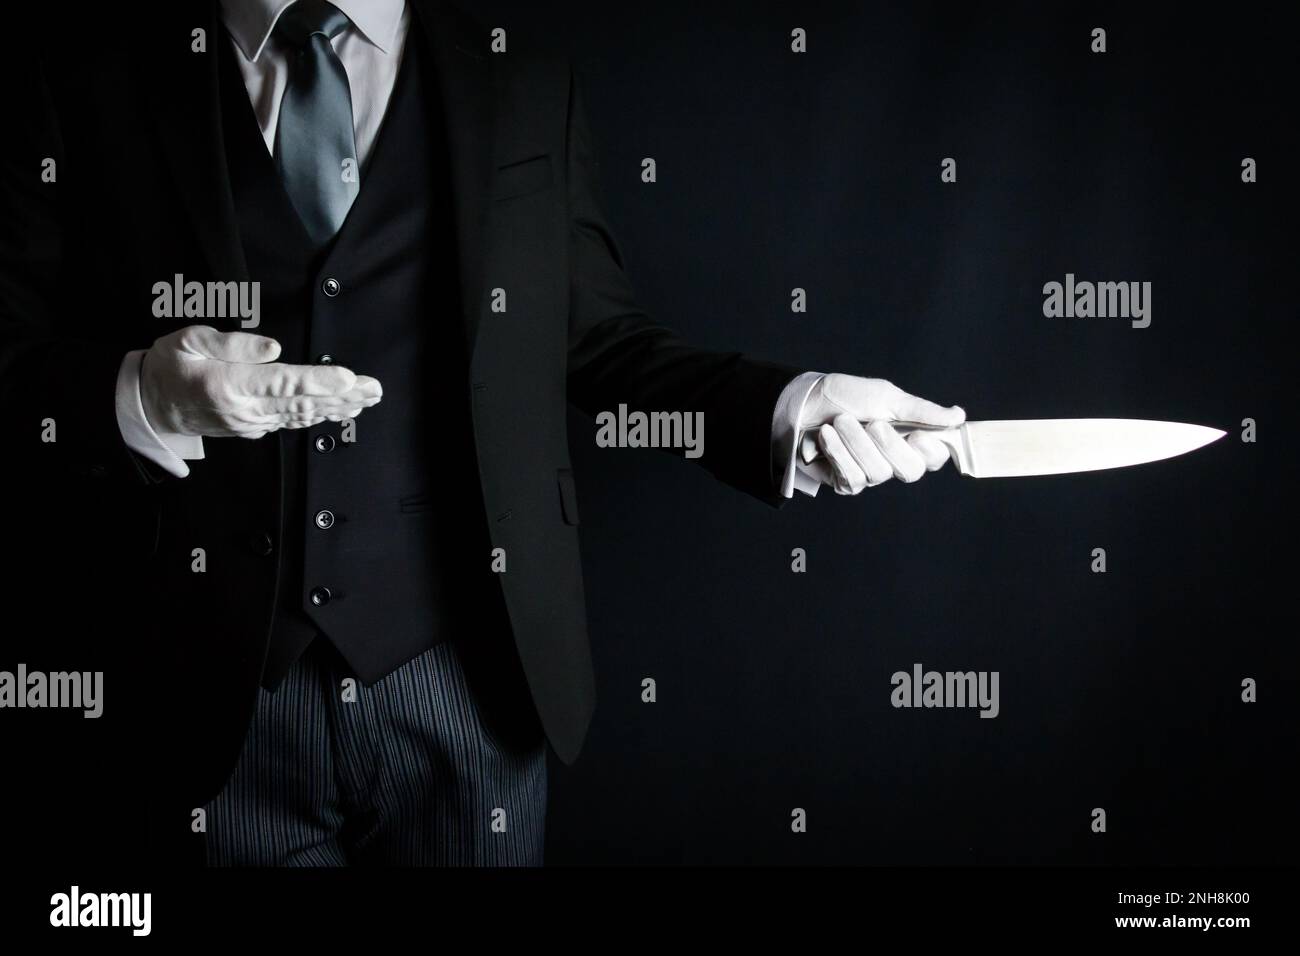 Portrait of Butler in Dark Suit and White Gloves Holding Sharp Knife. Concept of Butler Did It. Stock Photo